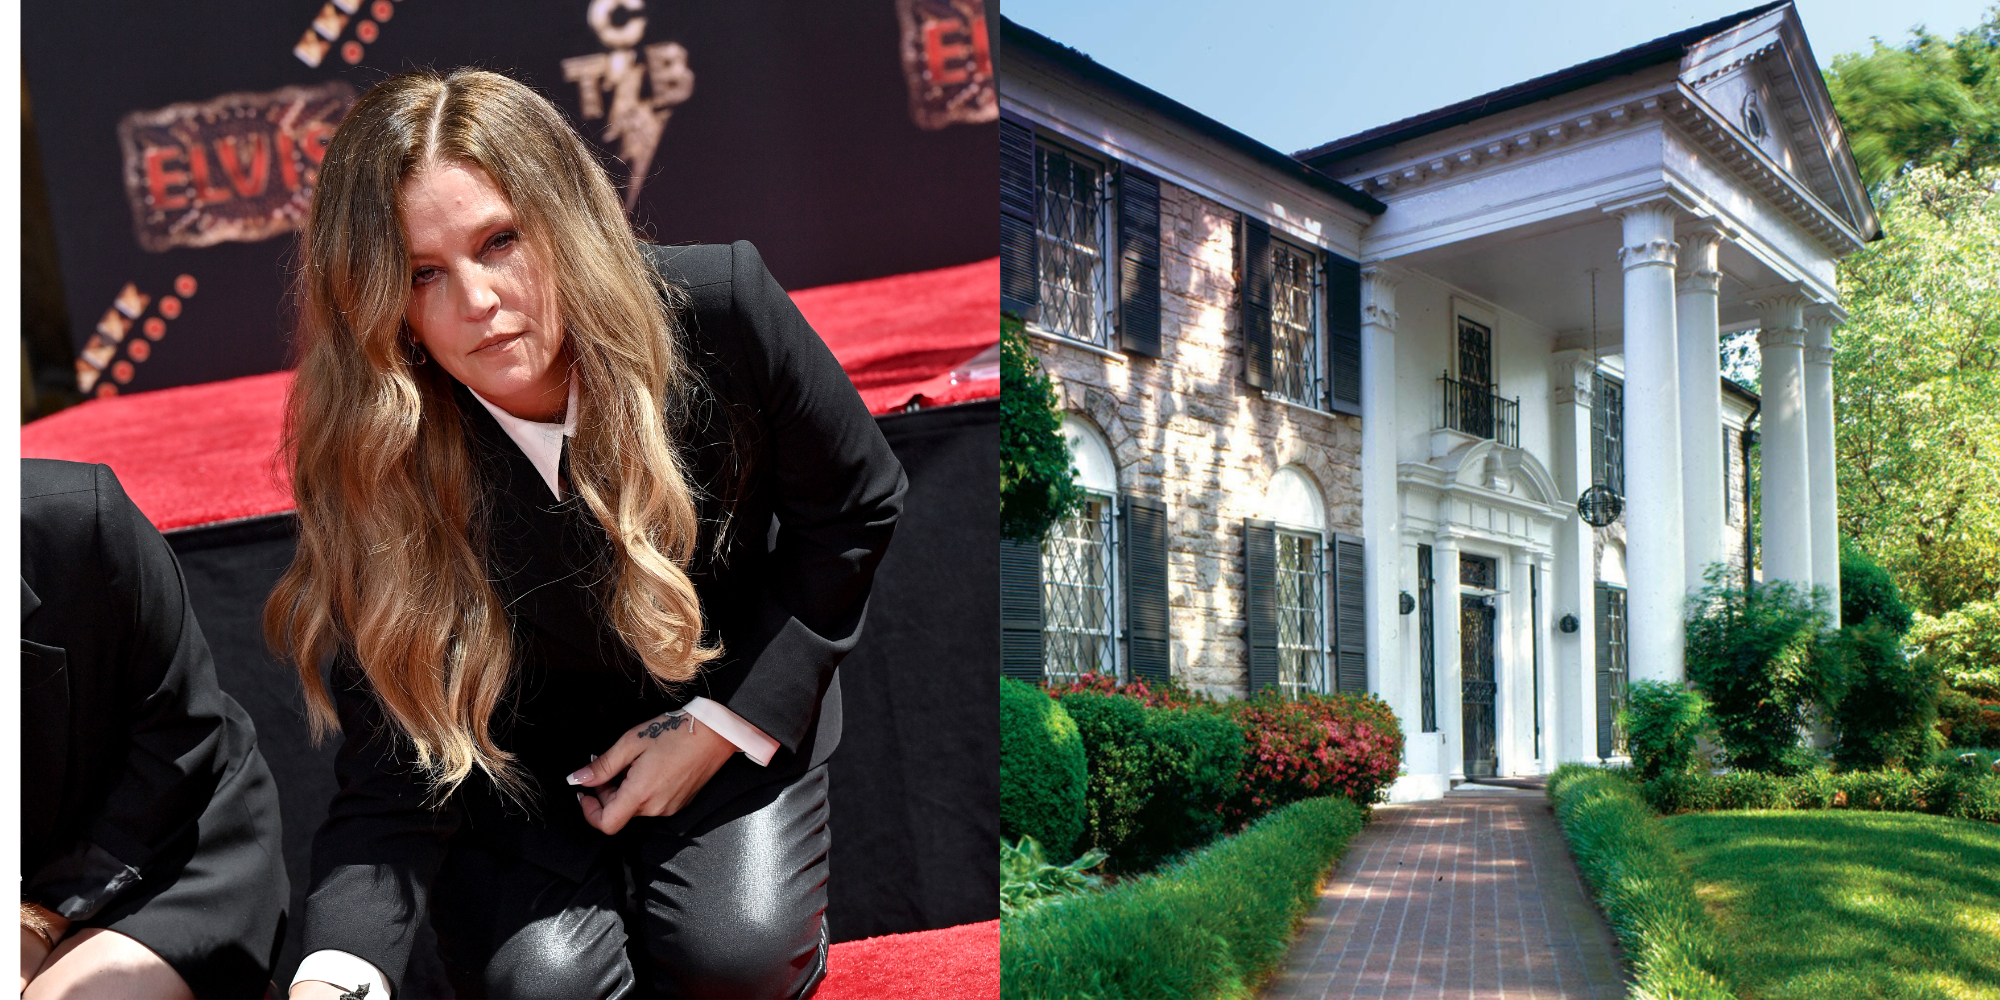 Lisa Marie Presley is pictured in a side by side photo next to her childhood home, Graceland.